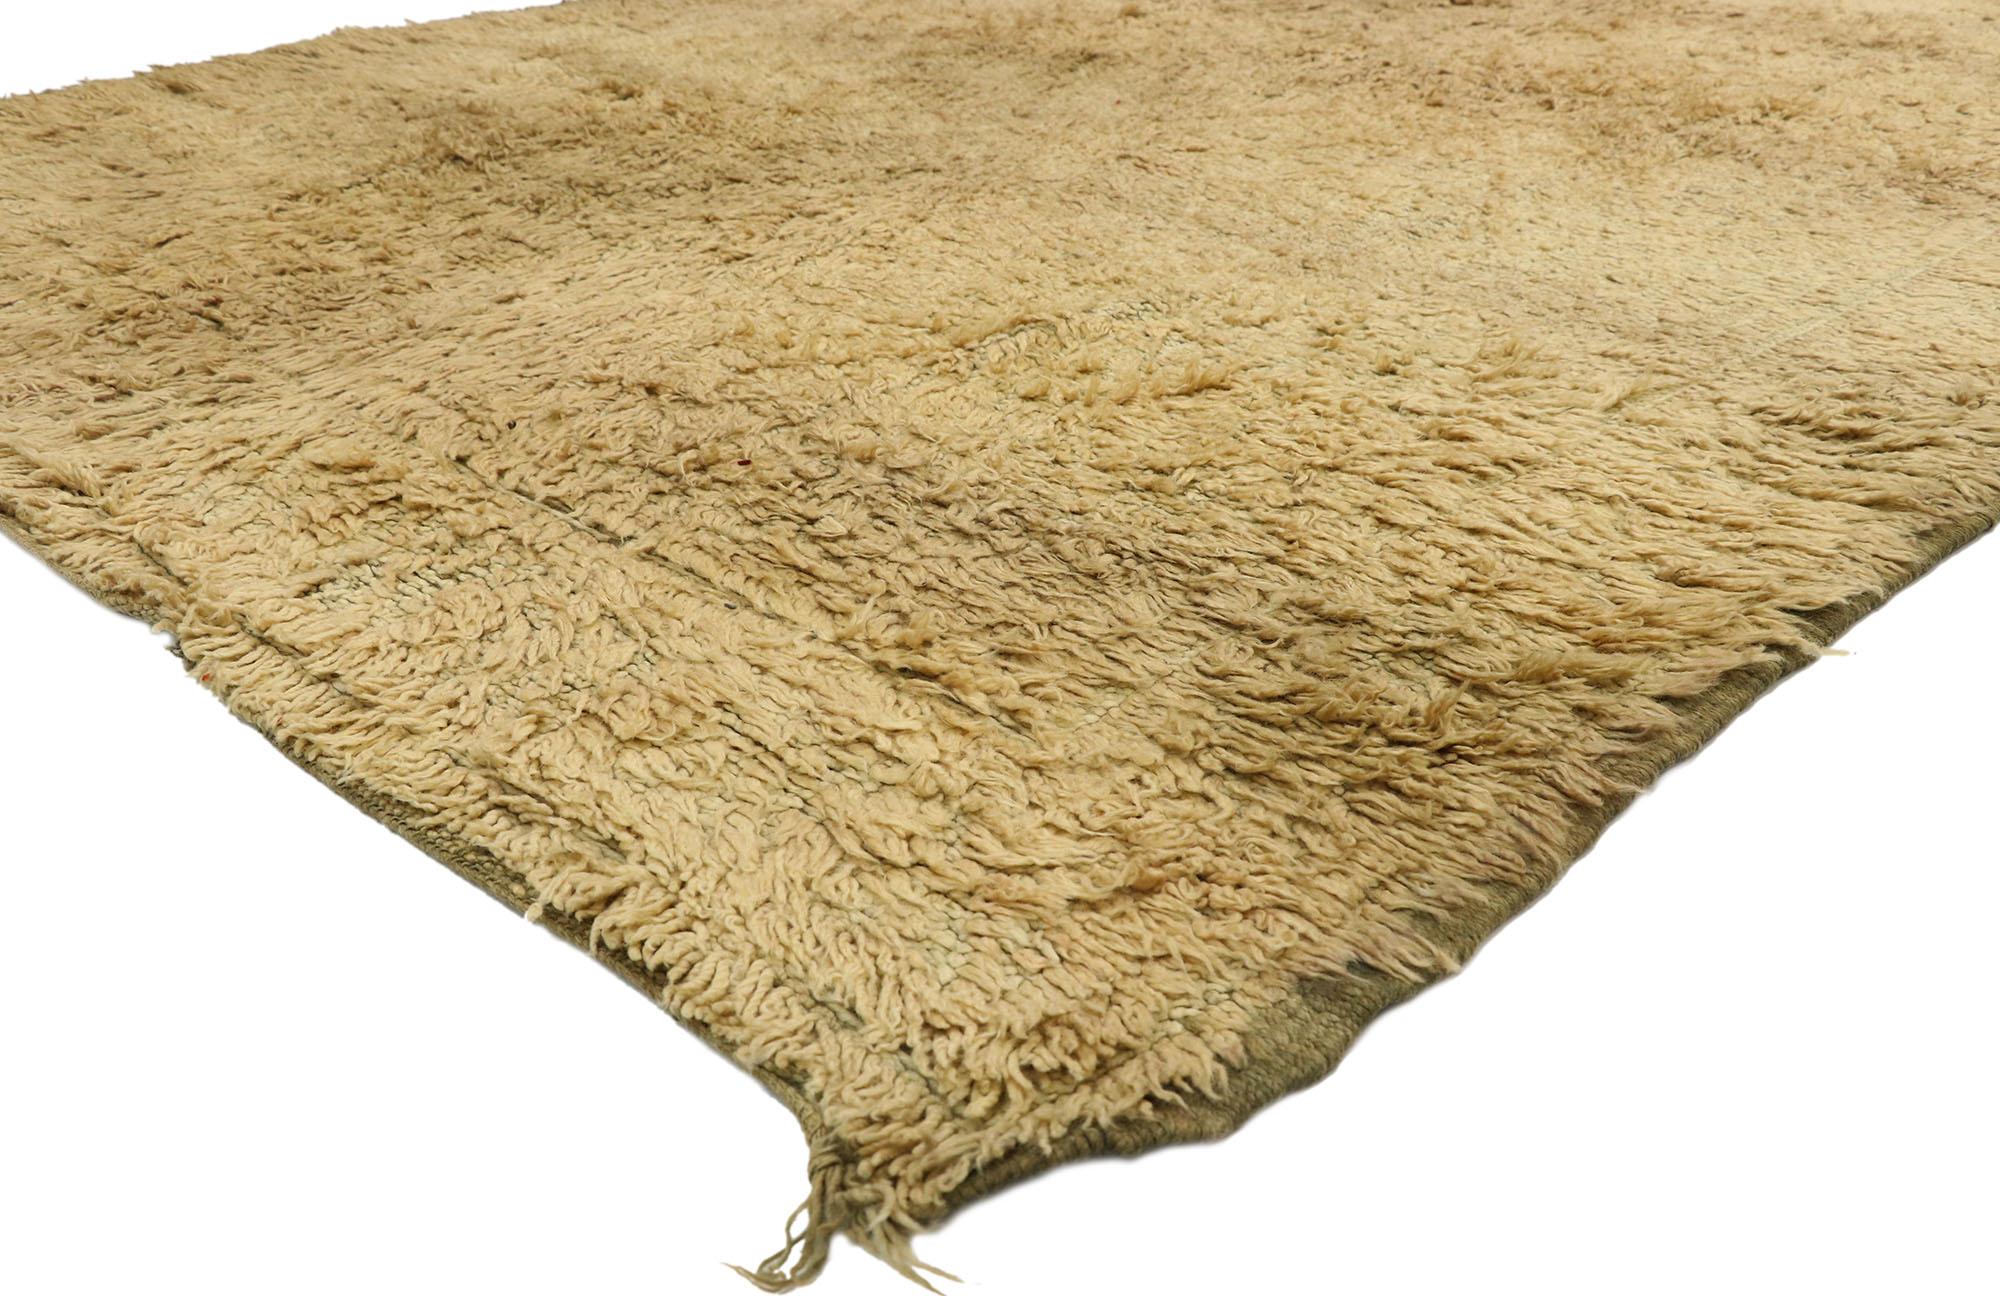 20986 vintage Berber Moroccan rug with Minimalist style. Softer yet no less striking, this hand knotted wool vintage Berber Moroccan rug features an abrashed sandy-beige field with neutral striations. The warm hues beautifully meld together in an